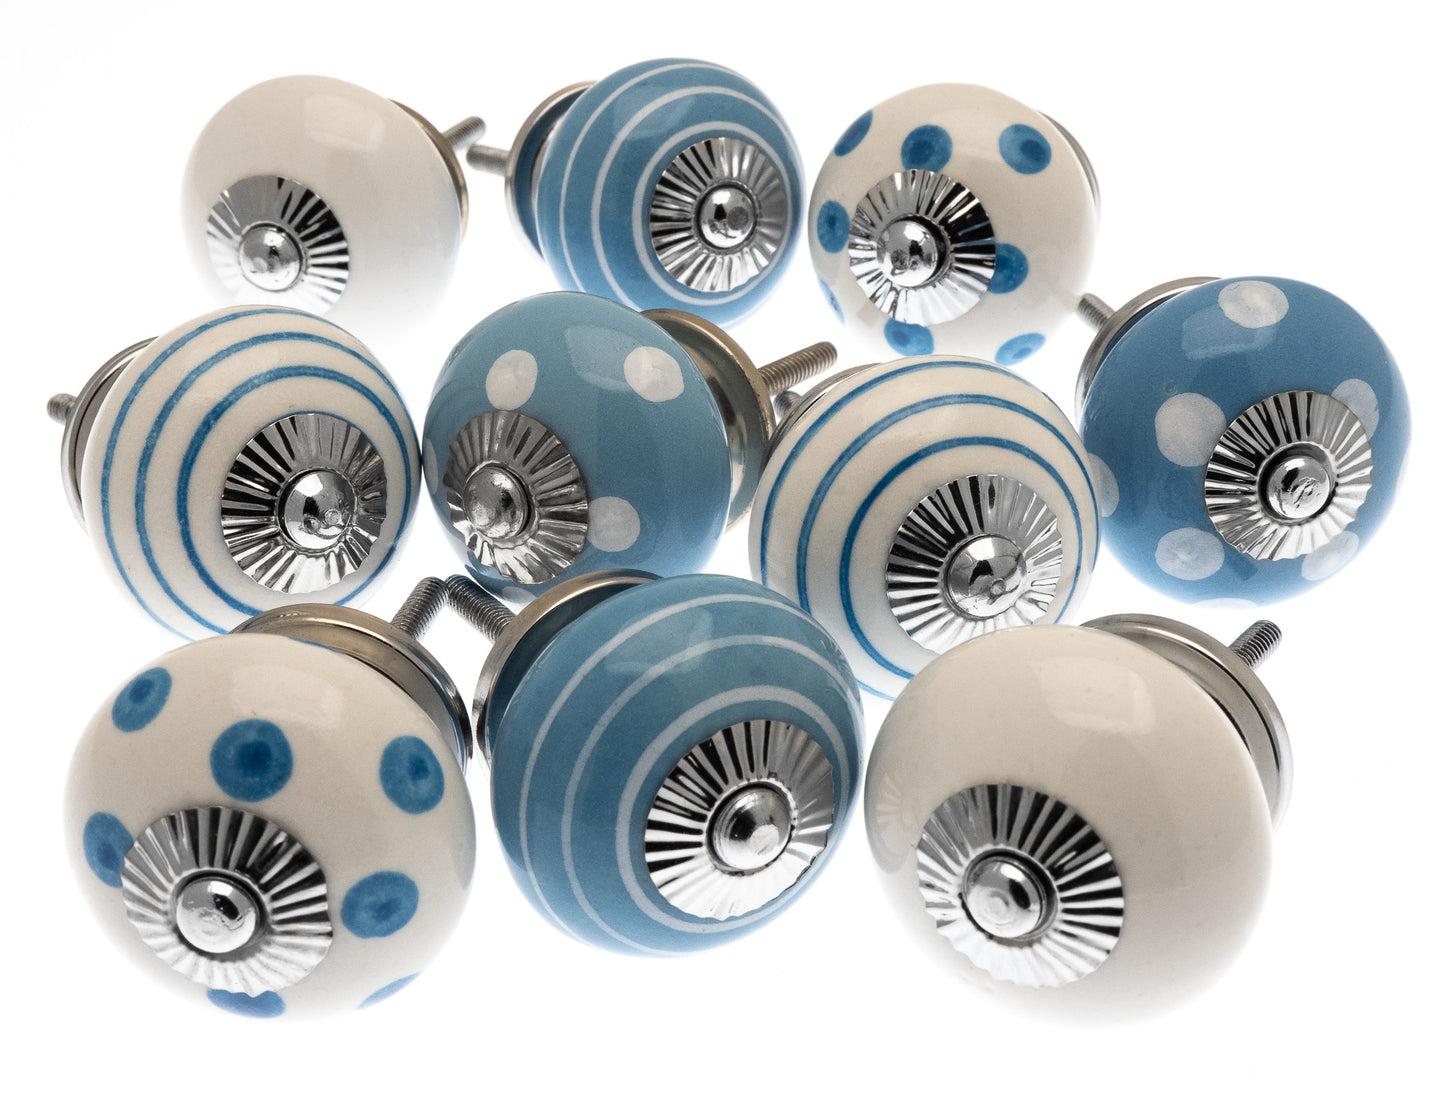 Ceramic Door Knobs in Pale Blue and White - Hand Painted (Set of 10)